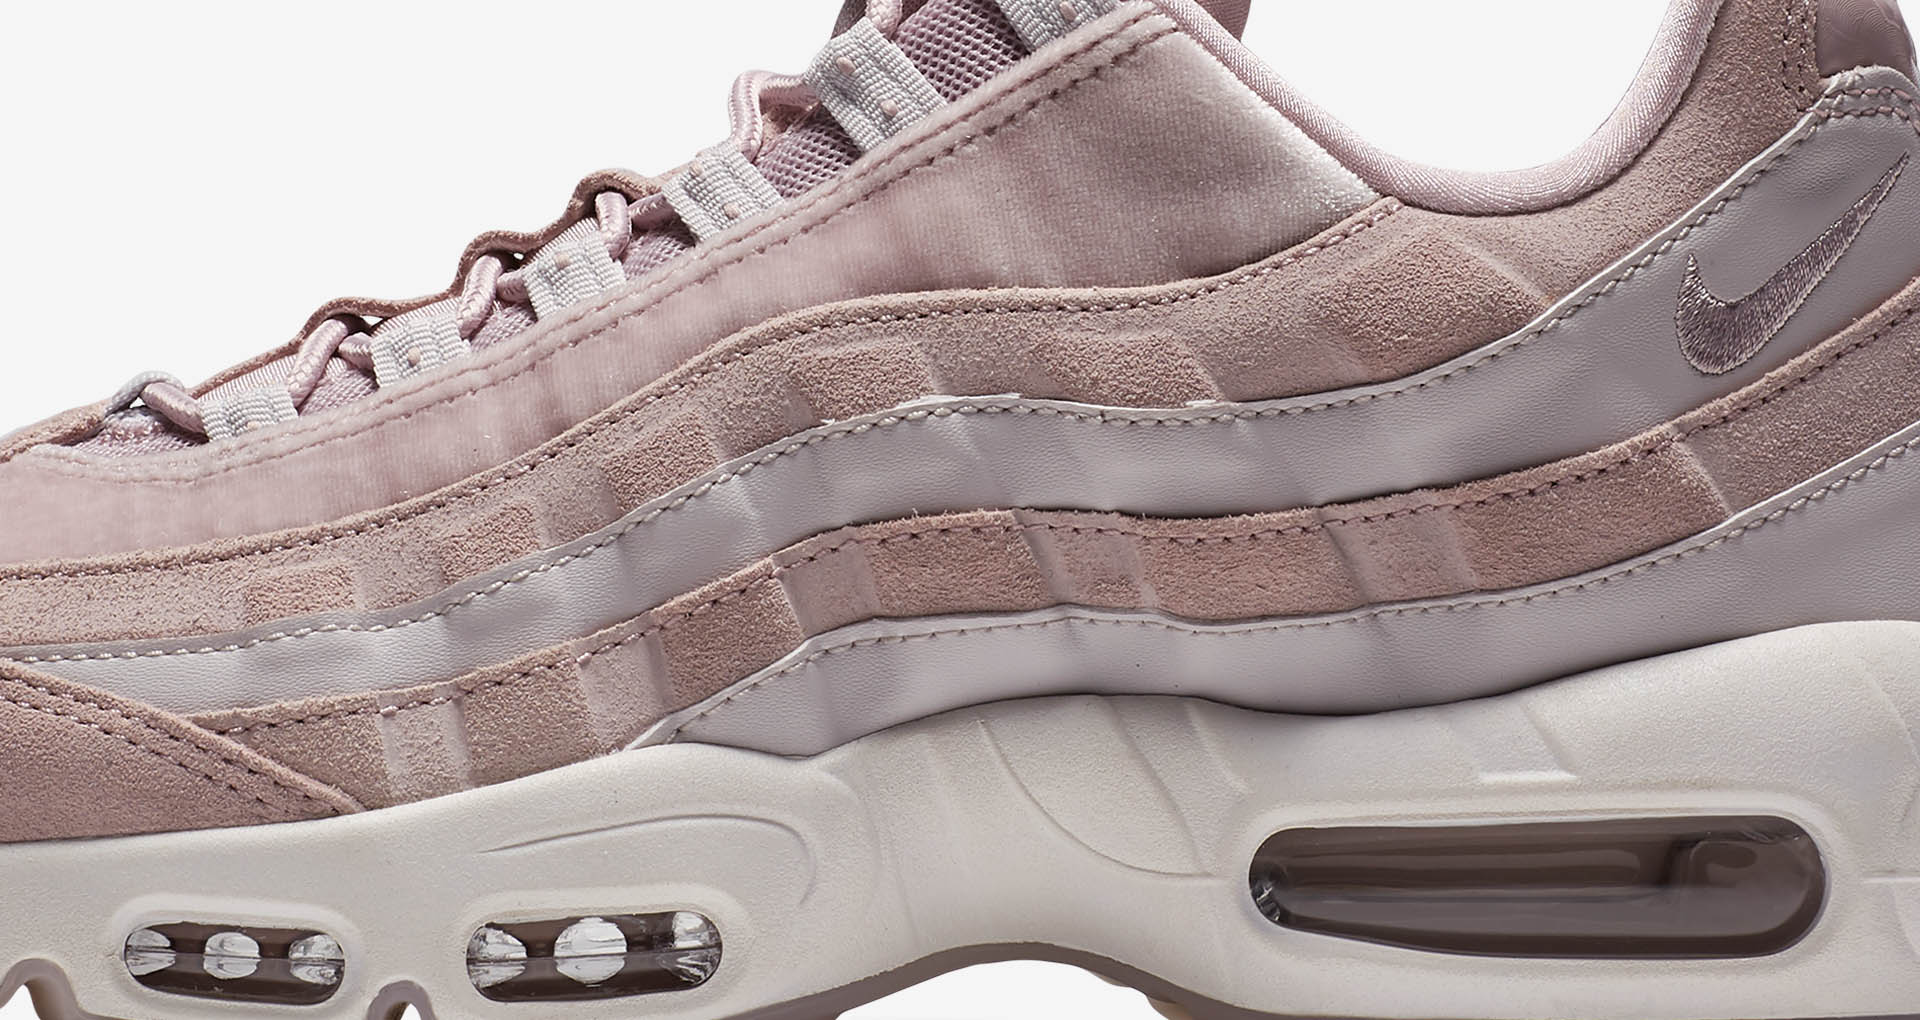 01-nike-air-max-95-lx-particle-rose-aa1103-600